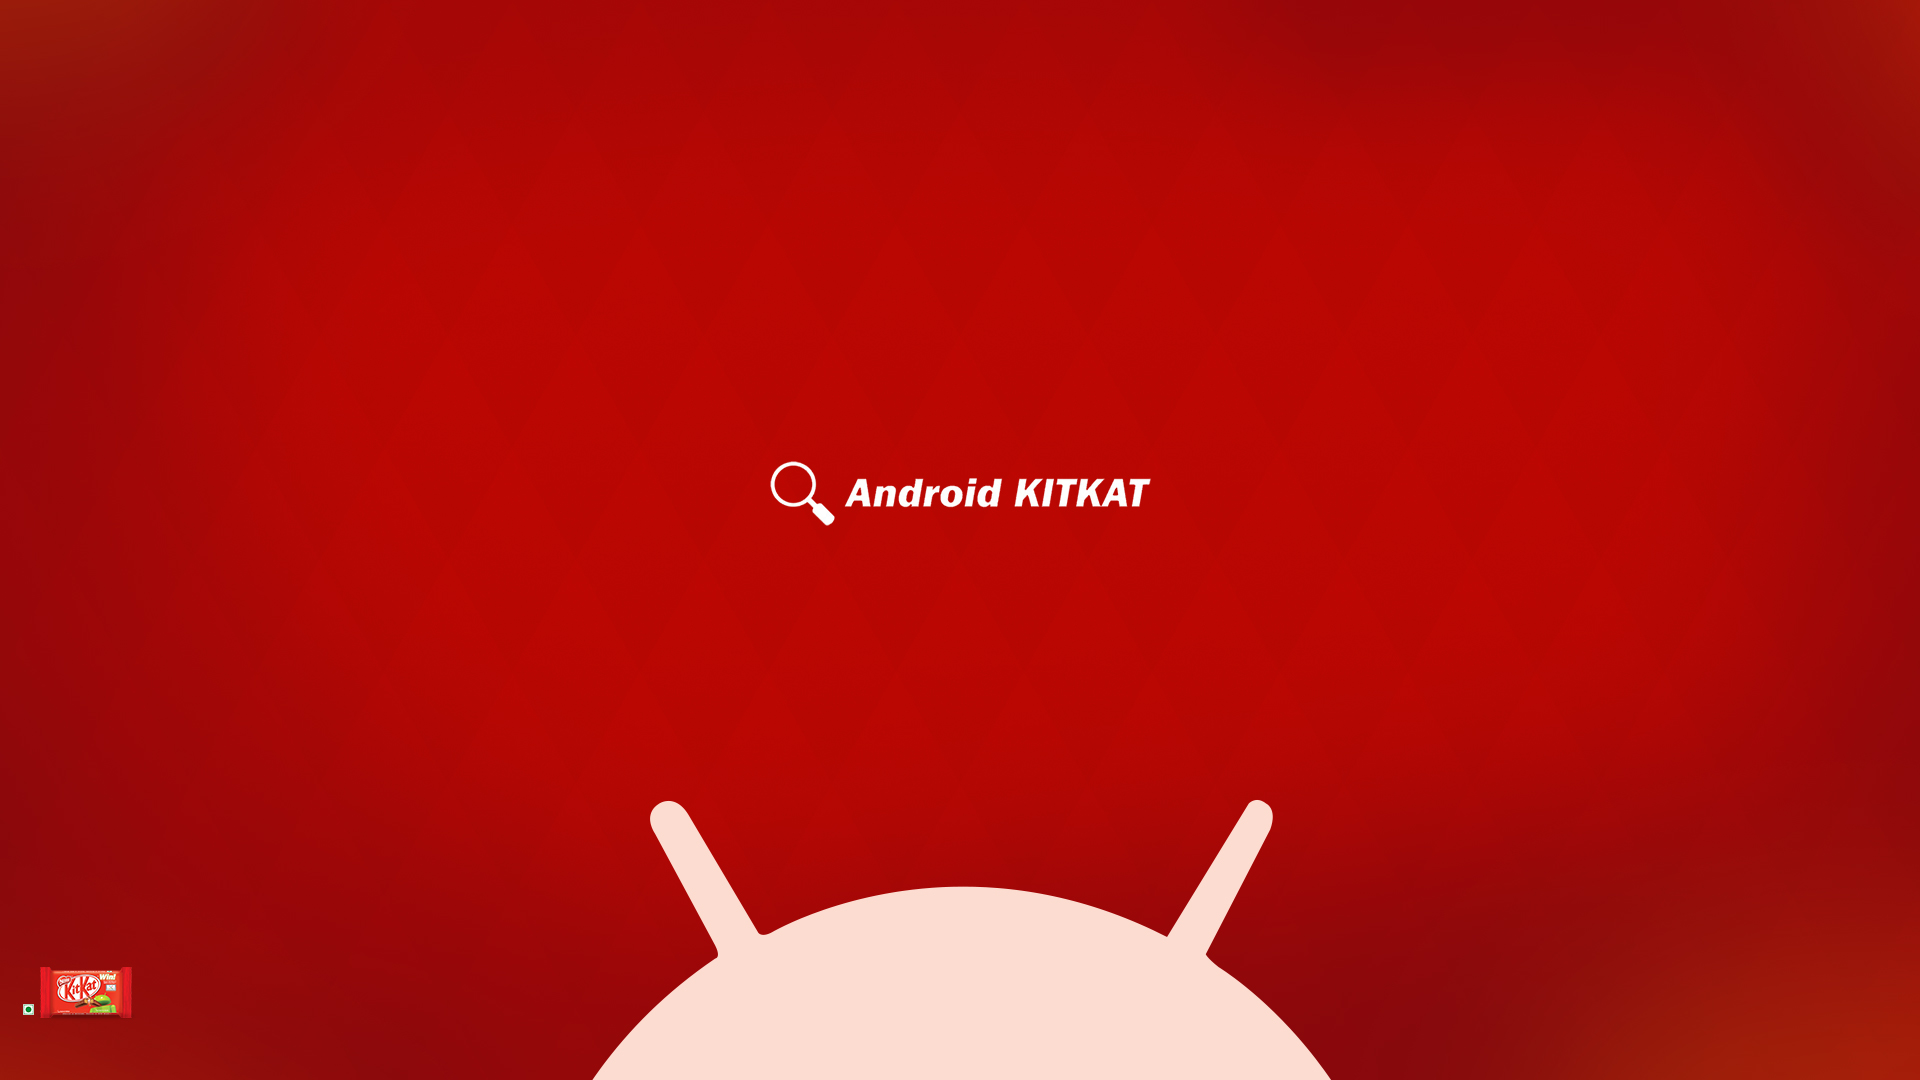 Search Android Kitkat Wallpaper